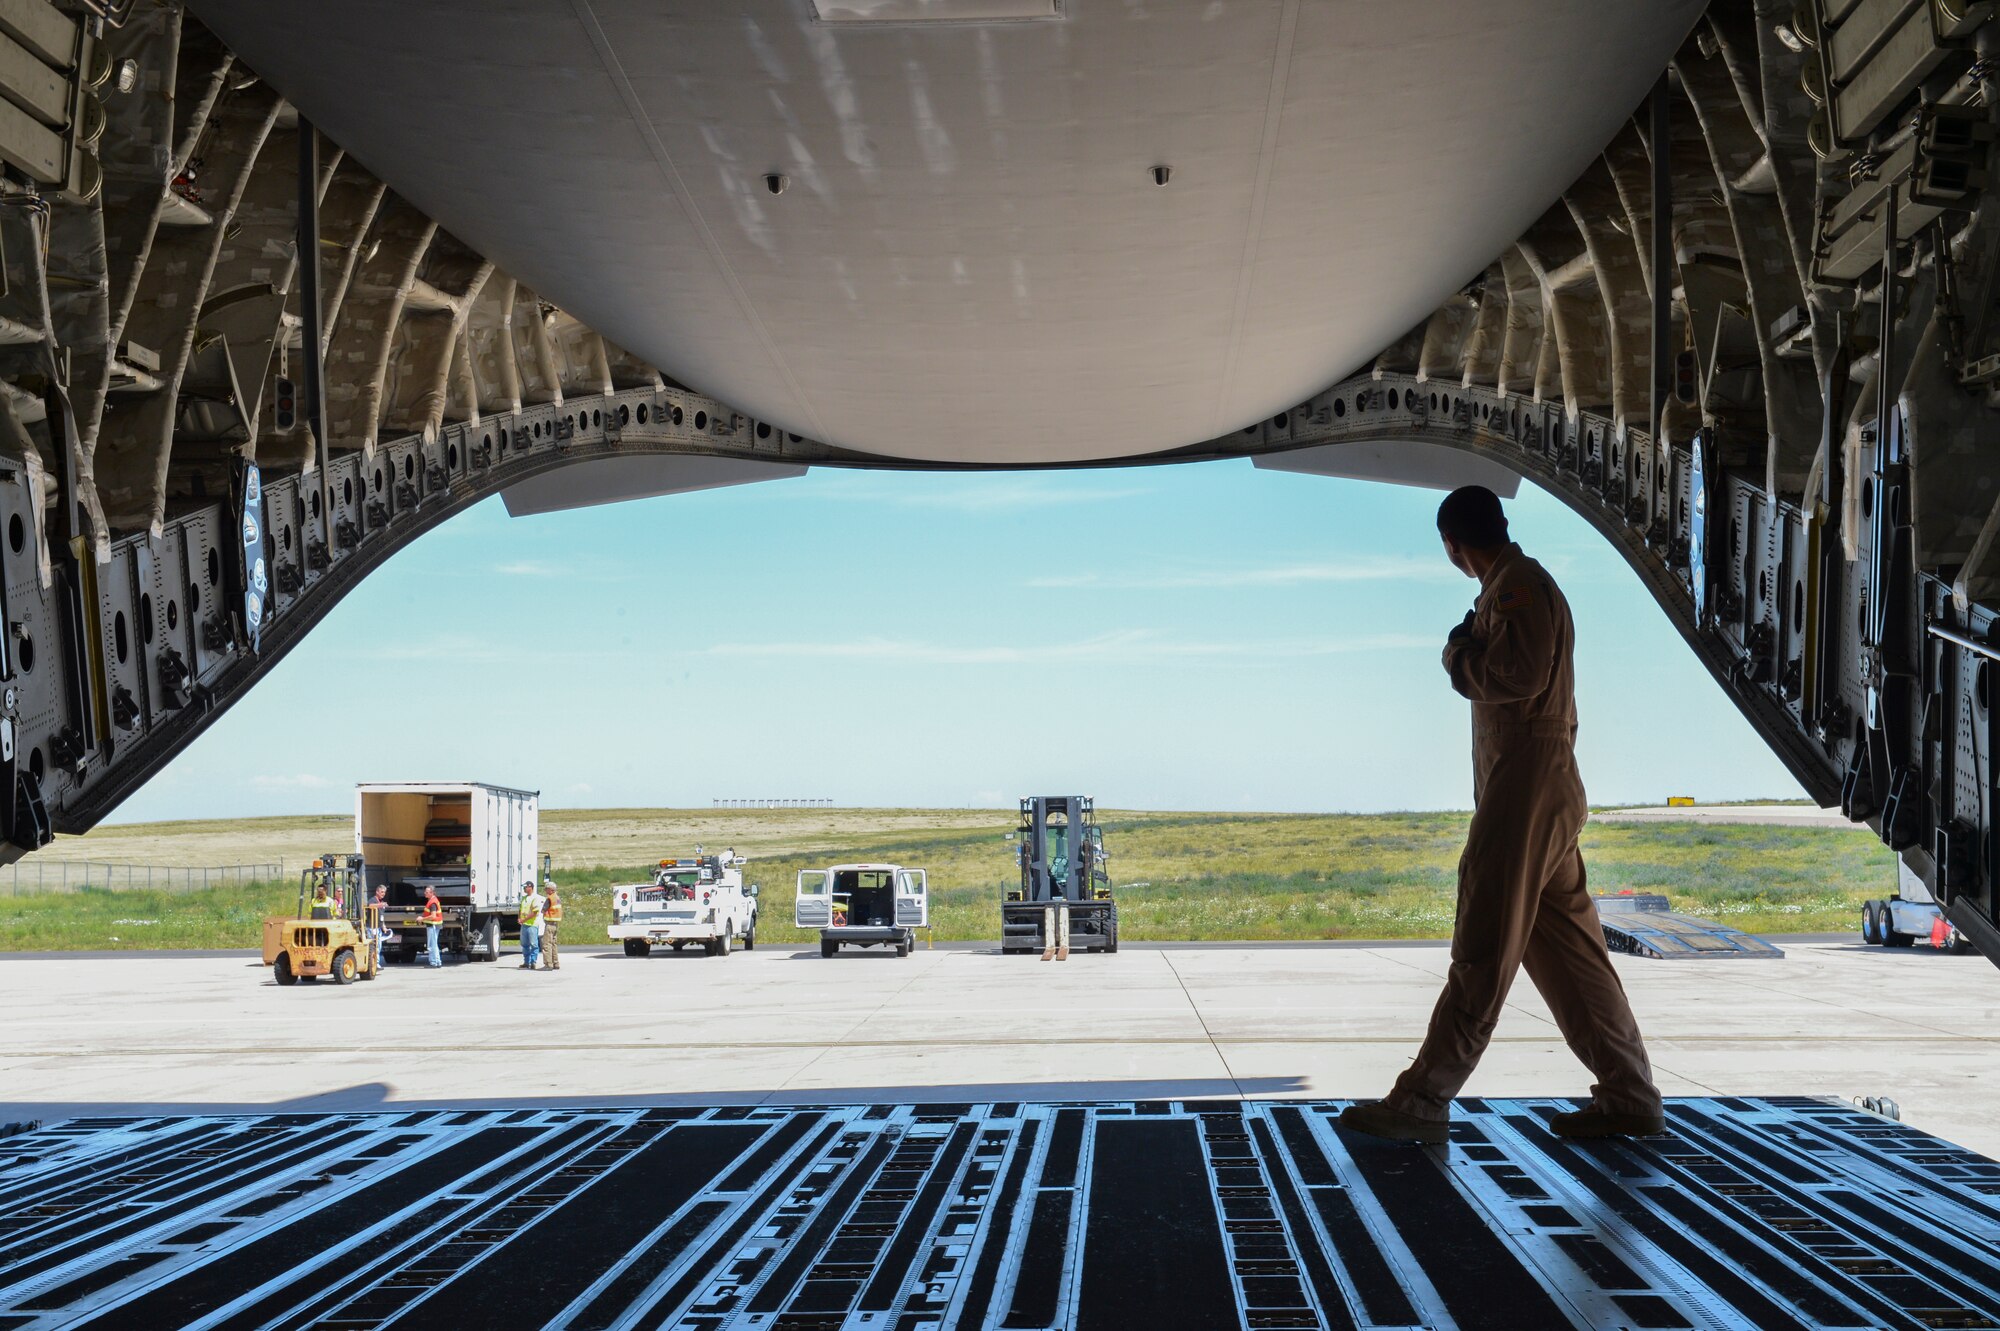 Tech. Sgt. Patrick Bloom, 21st Airlift Squadron loadmaster, a native of Highlands Ranch, Colo., walks across the back of a C-17 Globemaster III Aug. 2, 2013, at Buckley Air Force Base, Colo. Military members worked alongside NASA Goddard and Lockheed Martin representatives to load the Mars Atmosphere and Volatile Evolution Mission spacecraft into the C-17 to be shipped to the Kennedy Space Center. (U.S. Air Force photo by Staff Sgt. Paul Labbe/Released) 